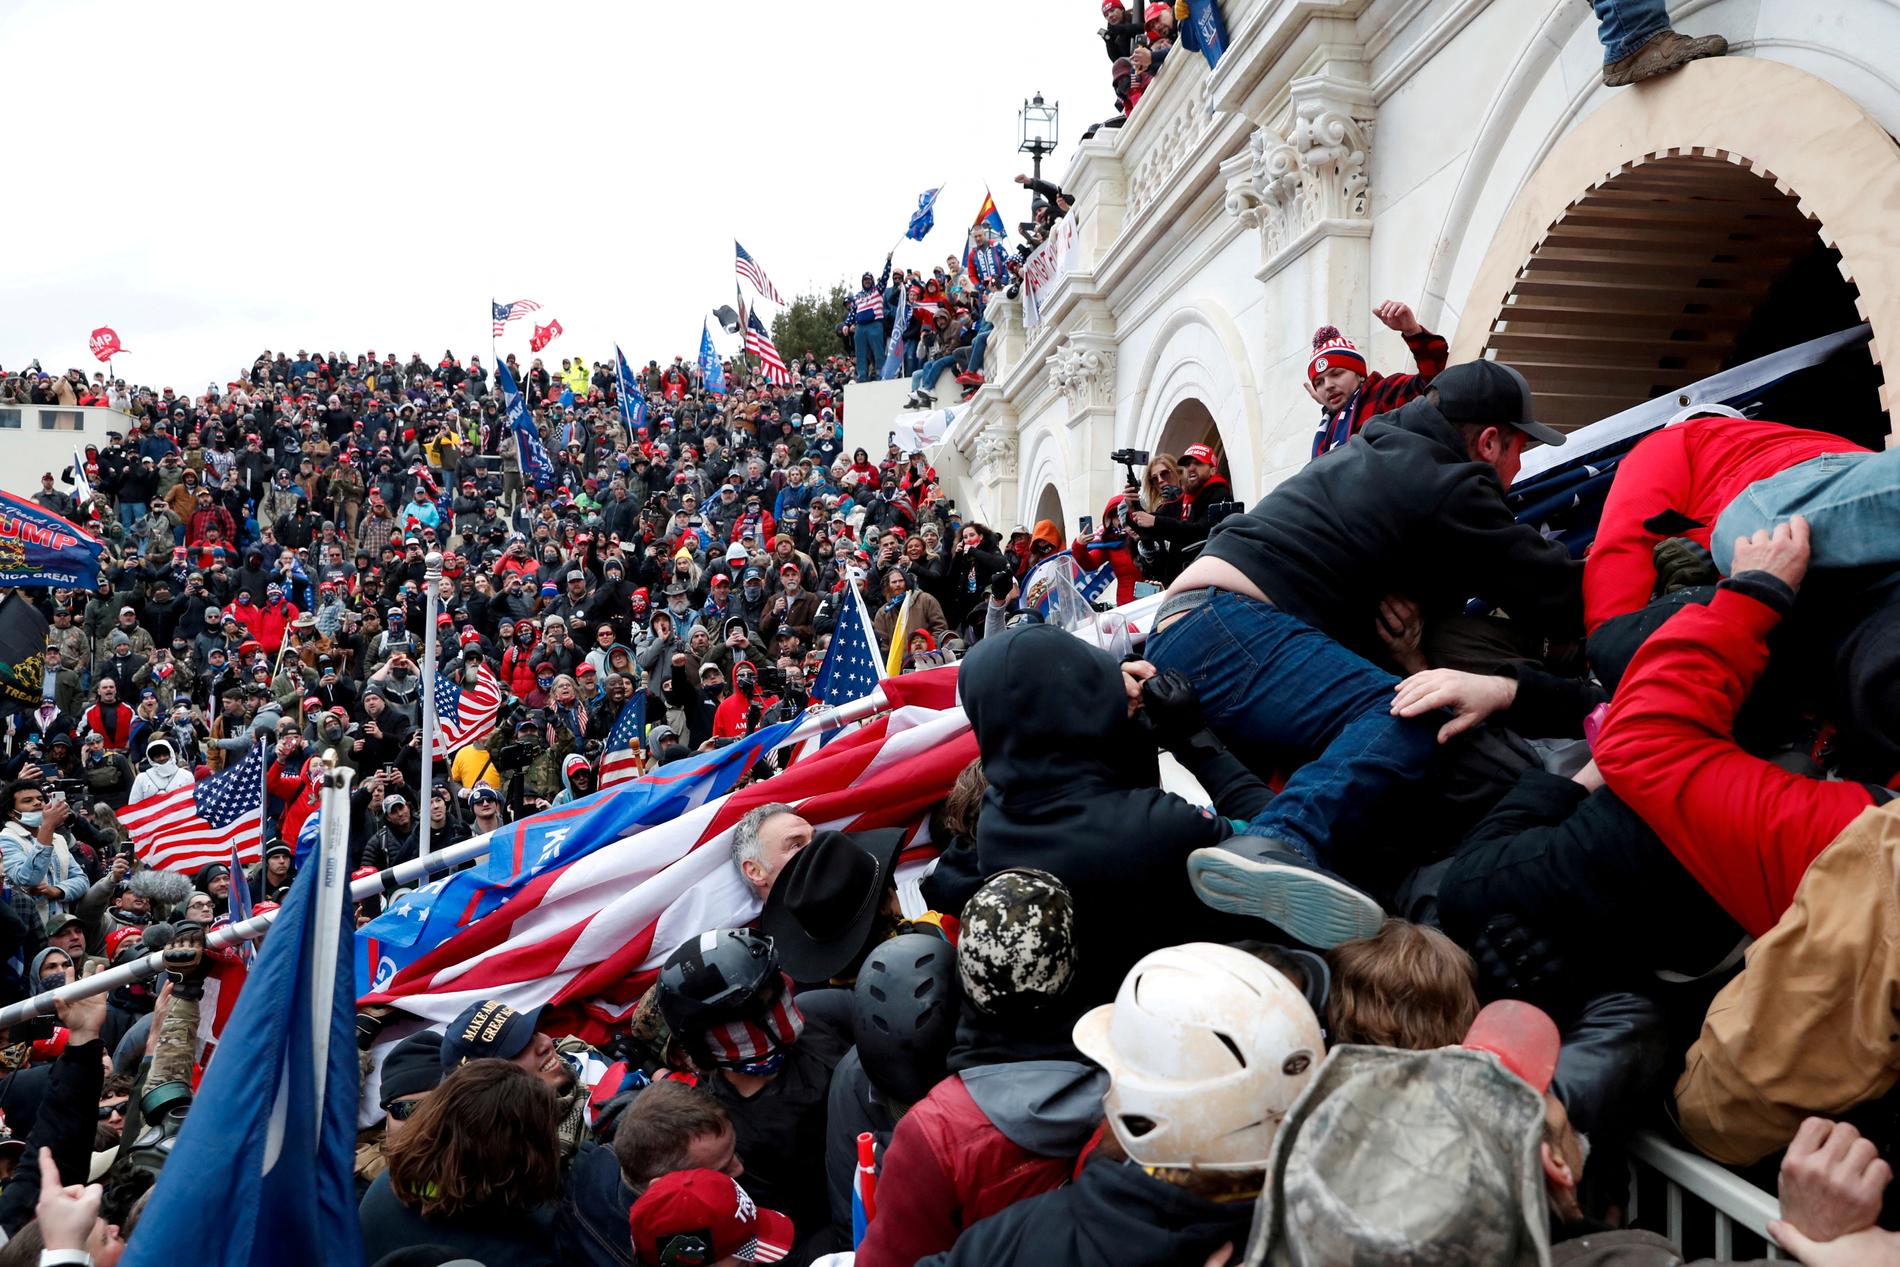 Storming of the Capitol: Trump supporters stormed Congress on January 6, saying that Joe Biden's election to the presidency should be approved.